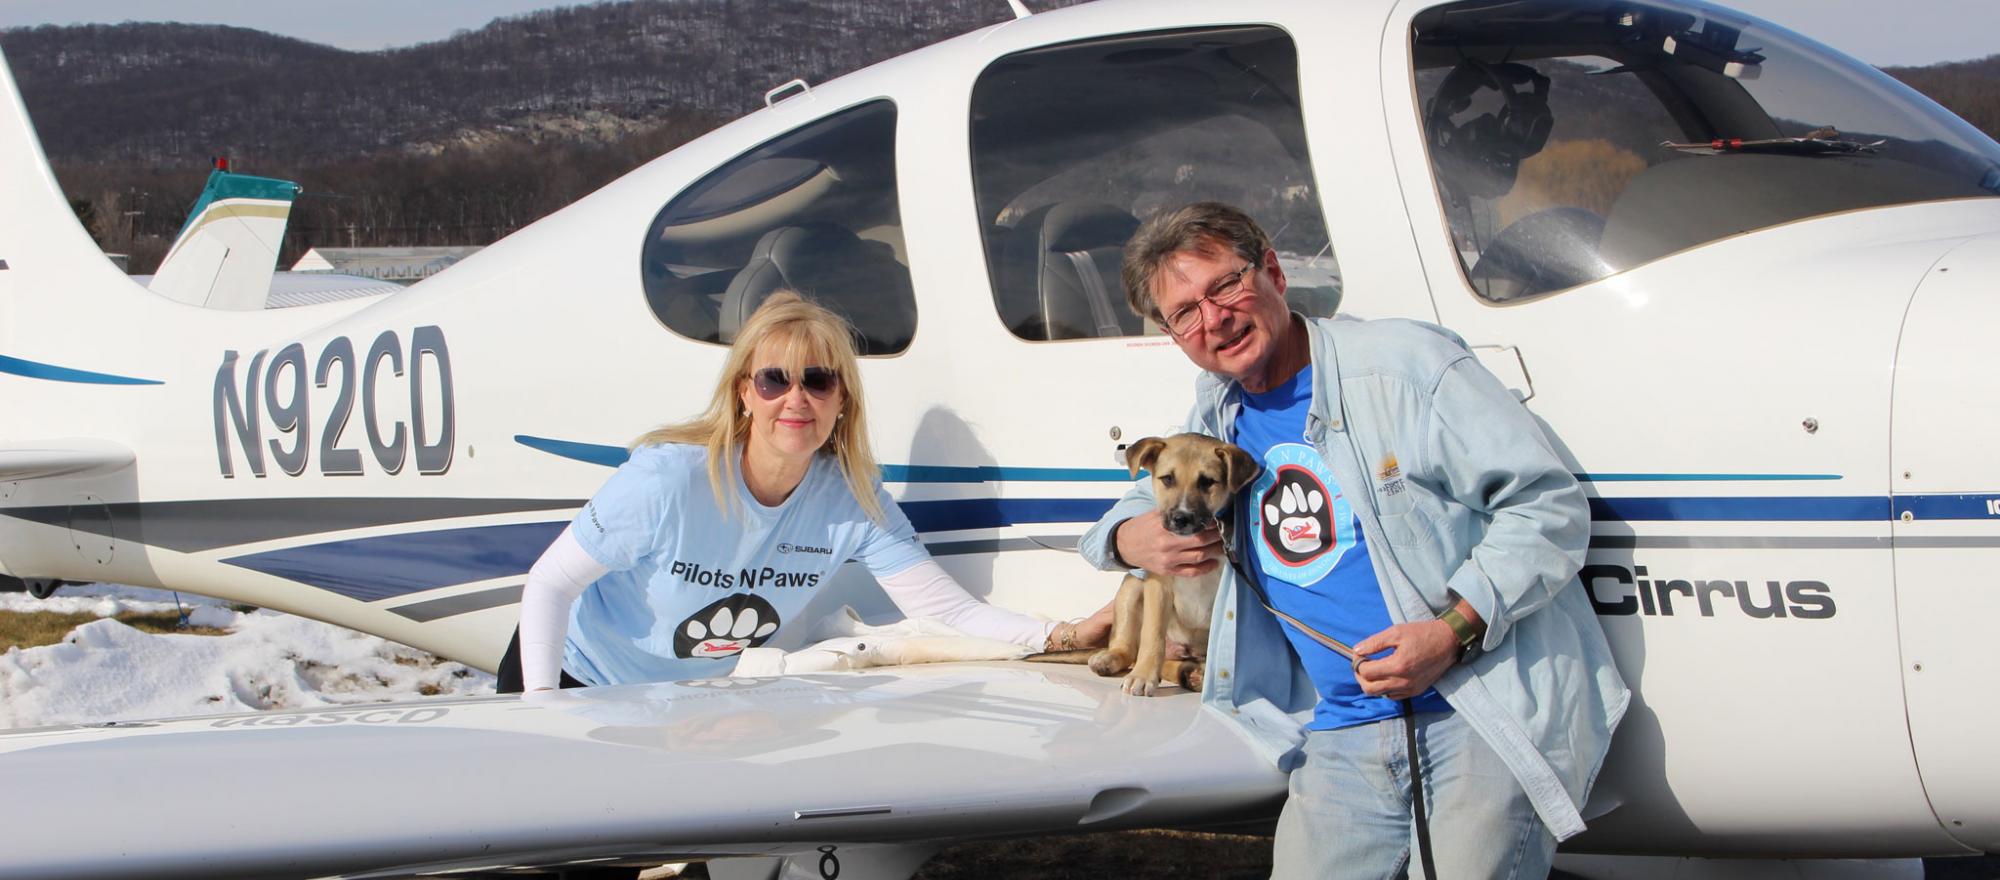 Pilots N Paws volunteers with rescue puppy on wing of Cirrus Aircraft following a rescue flight